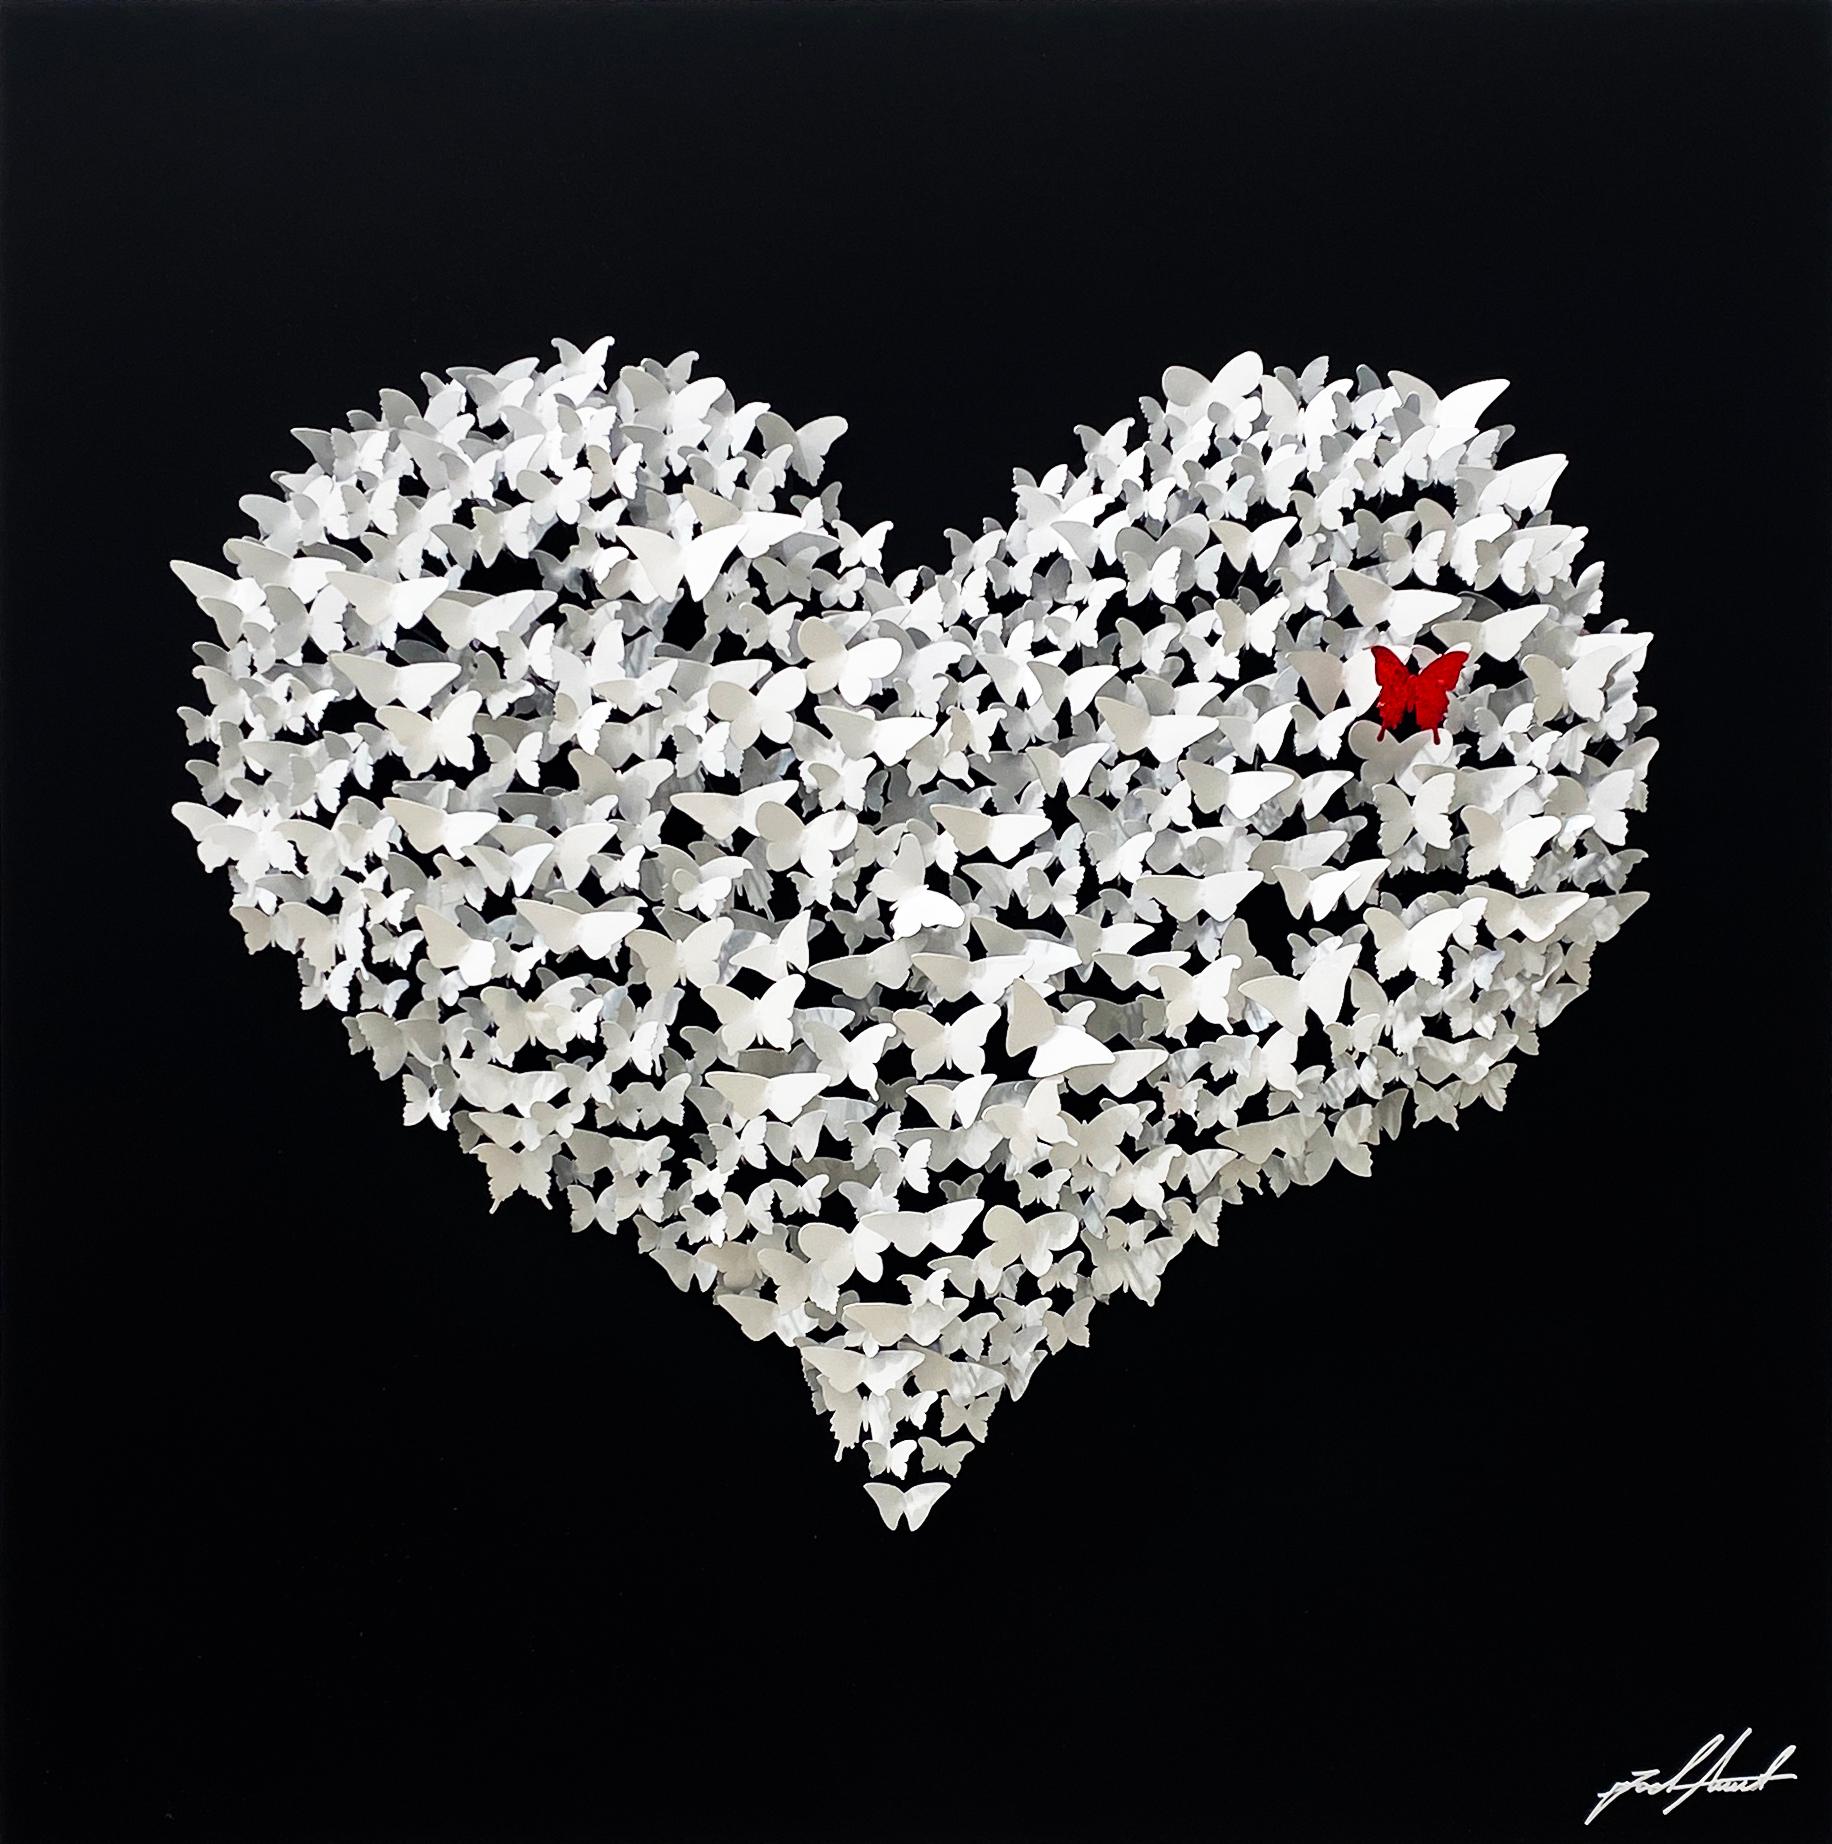 Flying Love - Black with White Butterflies, Mixed Media Metal Wall Sculpture